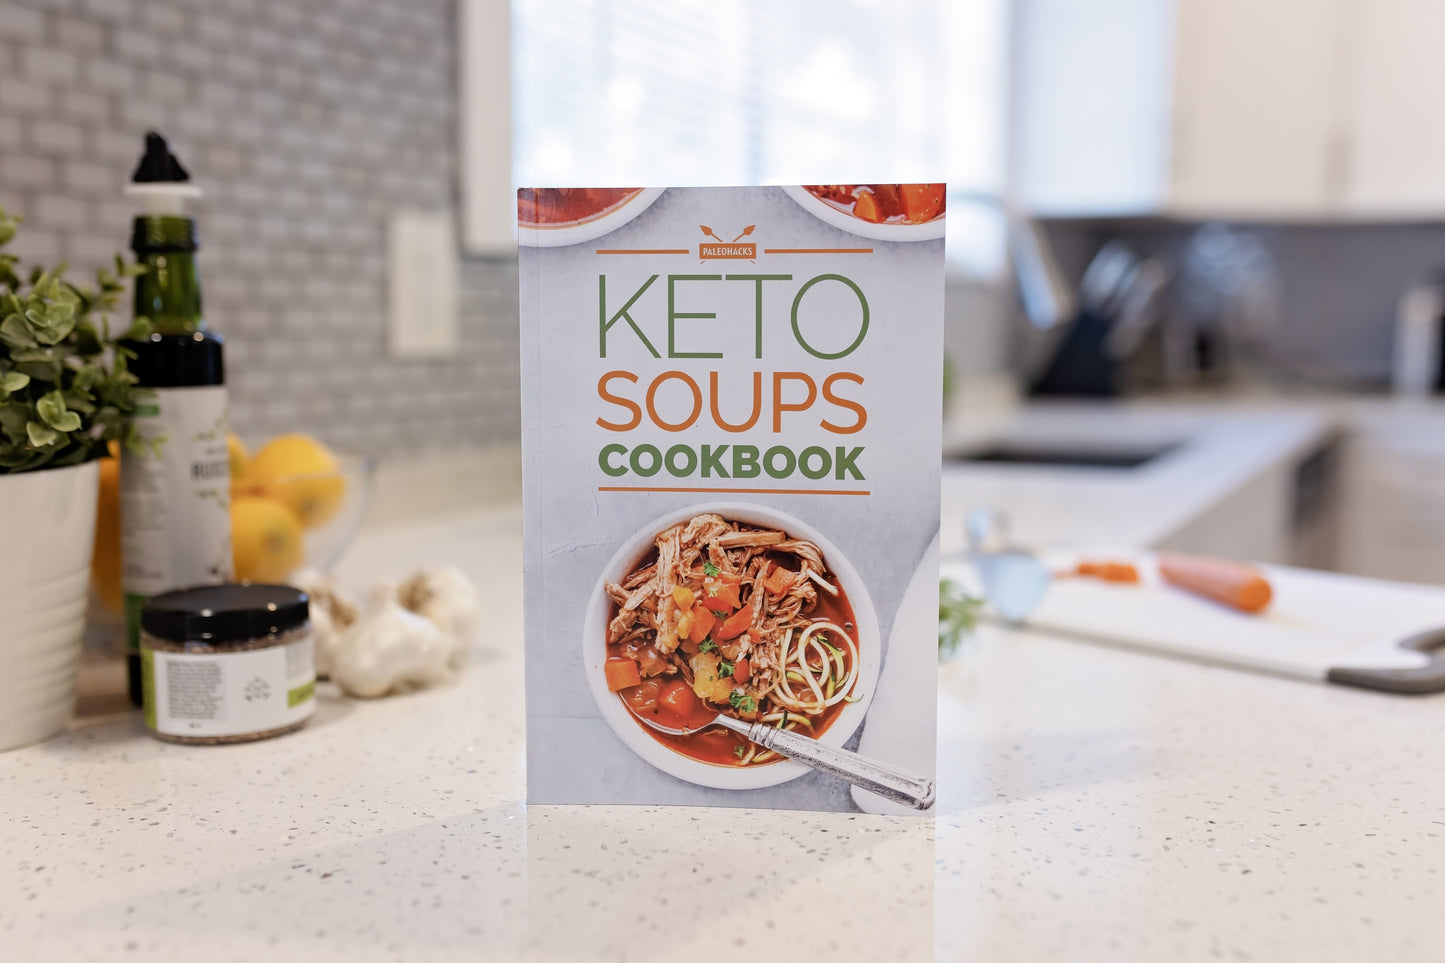 The Keto Soups Cookbook stands on a plain marble surface. Flower pots, vegetables, and some bottles can be seen.